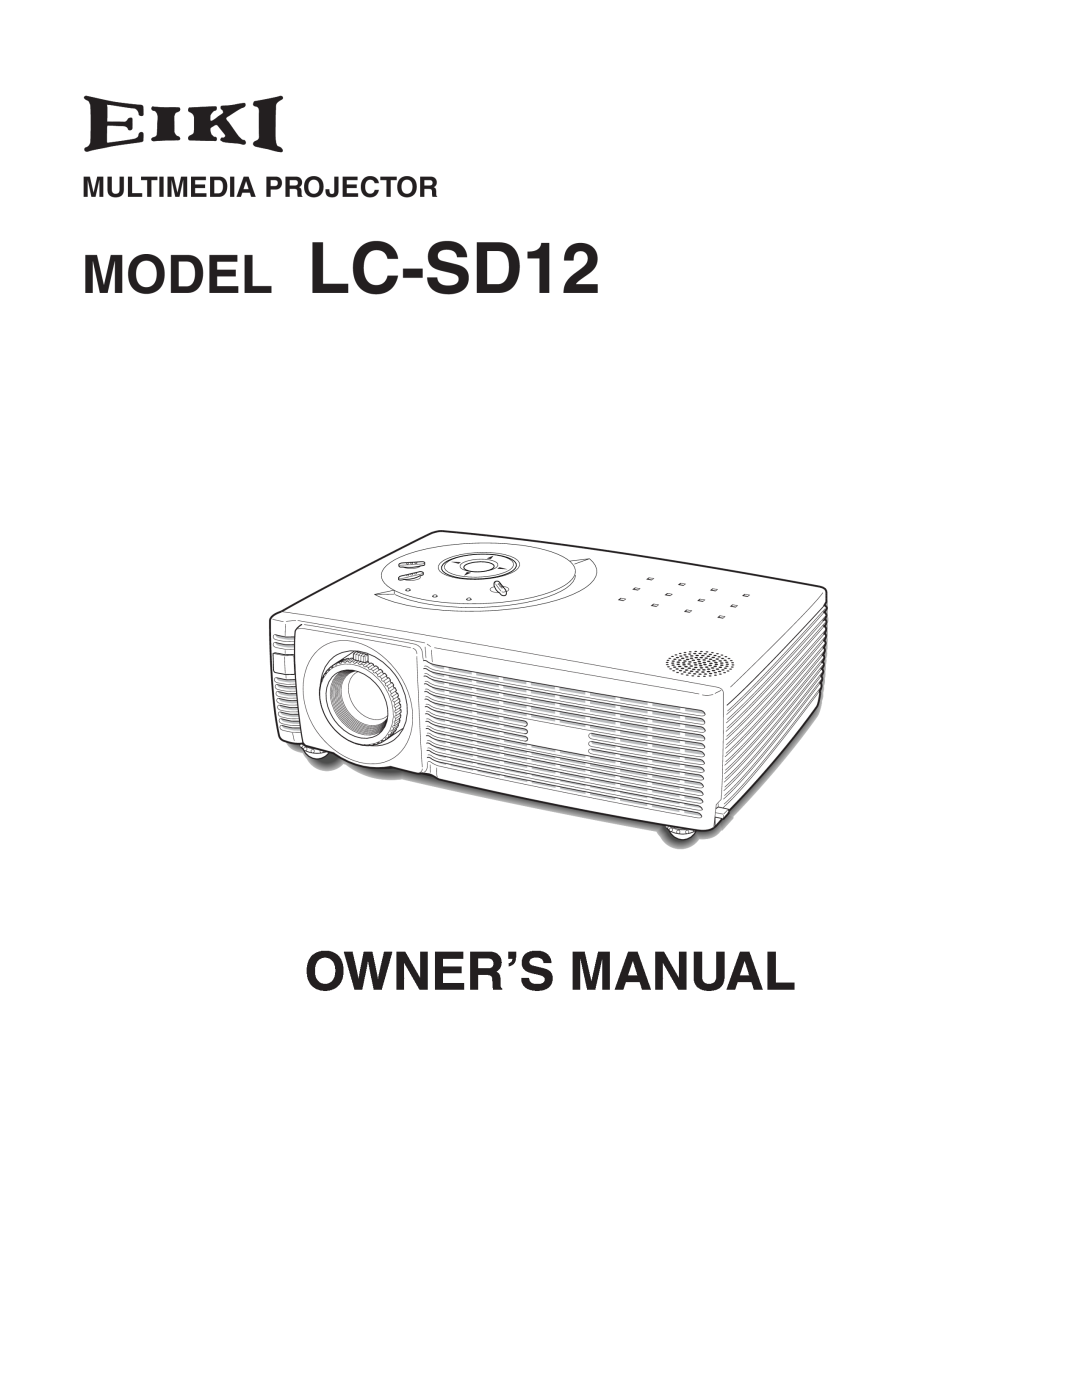 Eiki owner manual MODEL LC-SD12, Multimedia Projector 